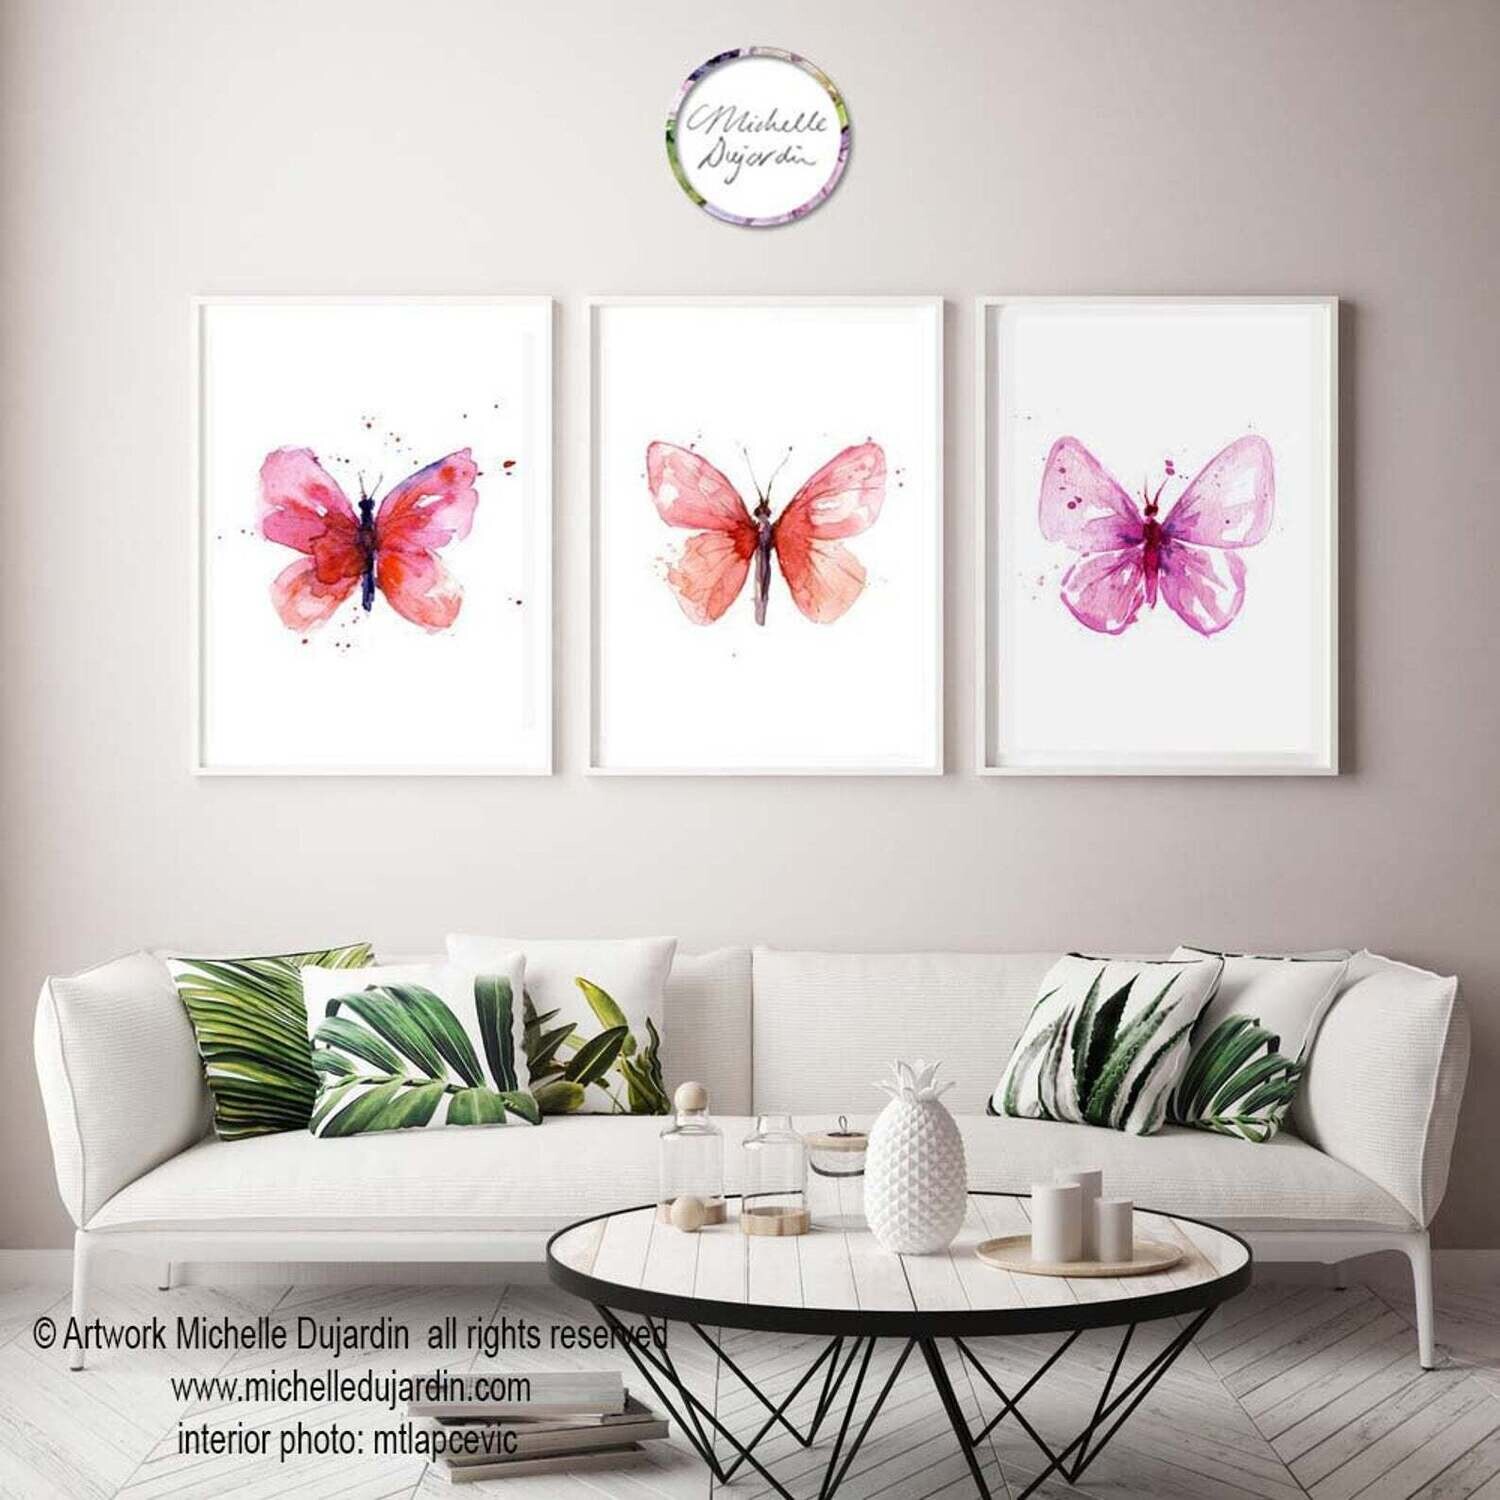 Set of 3 pink butterfly art prints of watercolor paintings